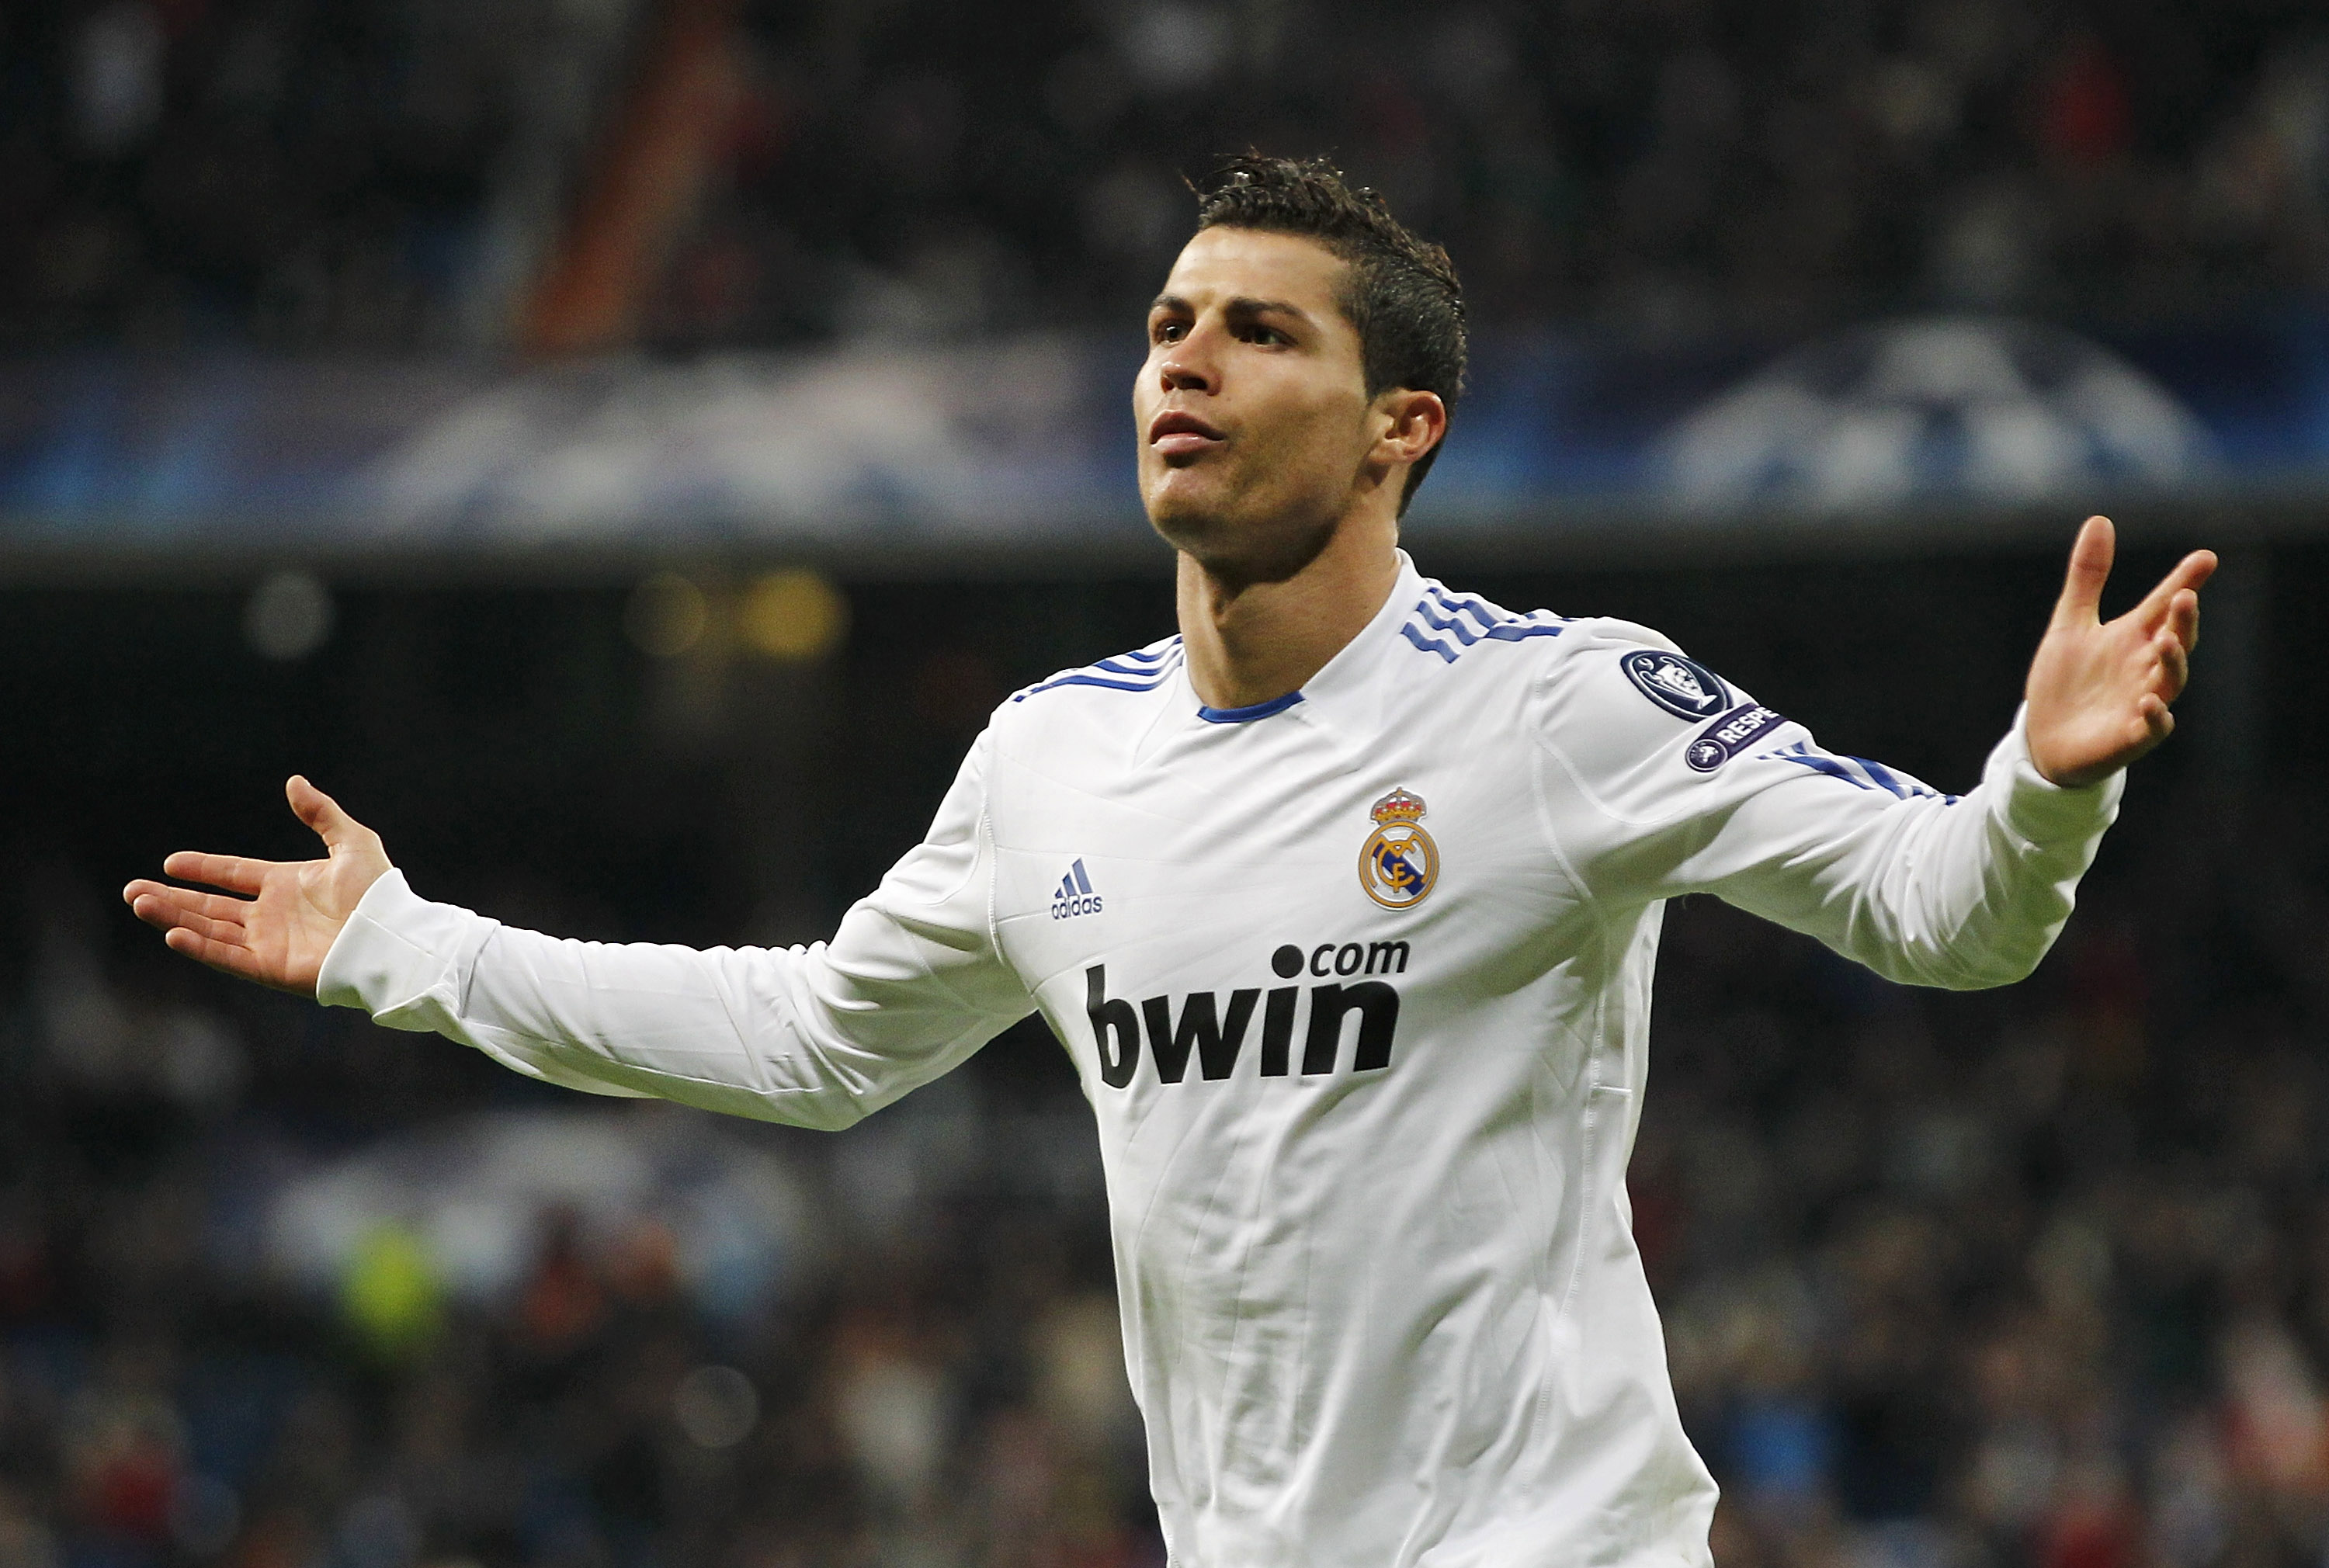 MADRID, SPAIN - DECEMBER 08:  Cristiano Ronaldo of Real Madrid celebrates after scoring Real's second goal during the Champions League group G match between Real Madrid and AJ Auxerre at Estadio Santiago Bernabeu on December 8, 2010 in Madrid, Spain.  (Ph